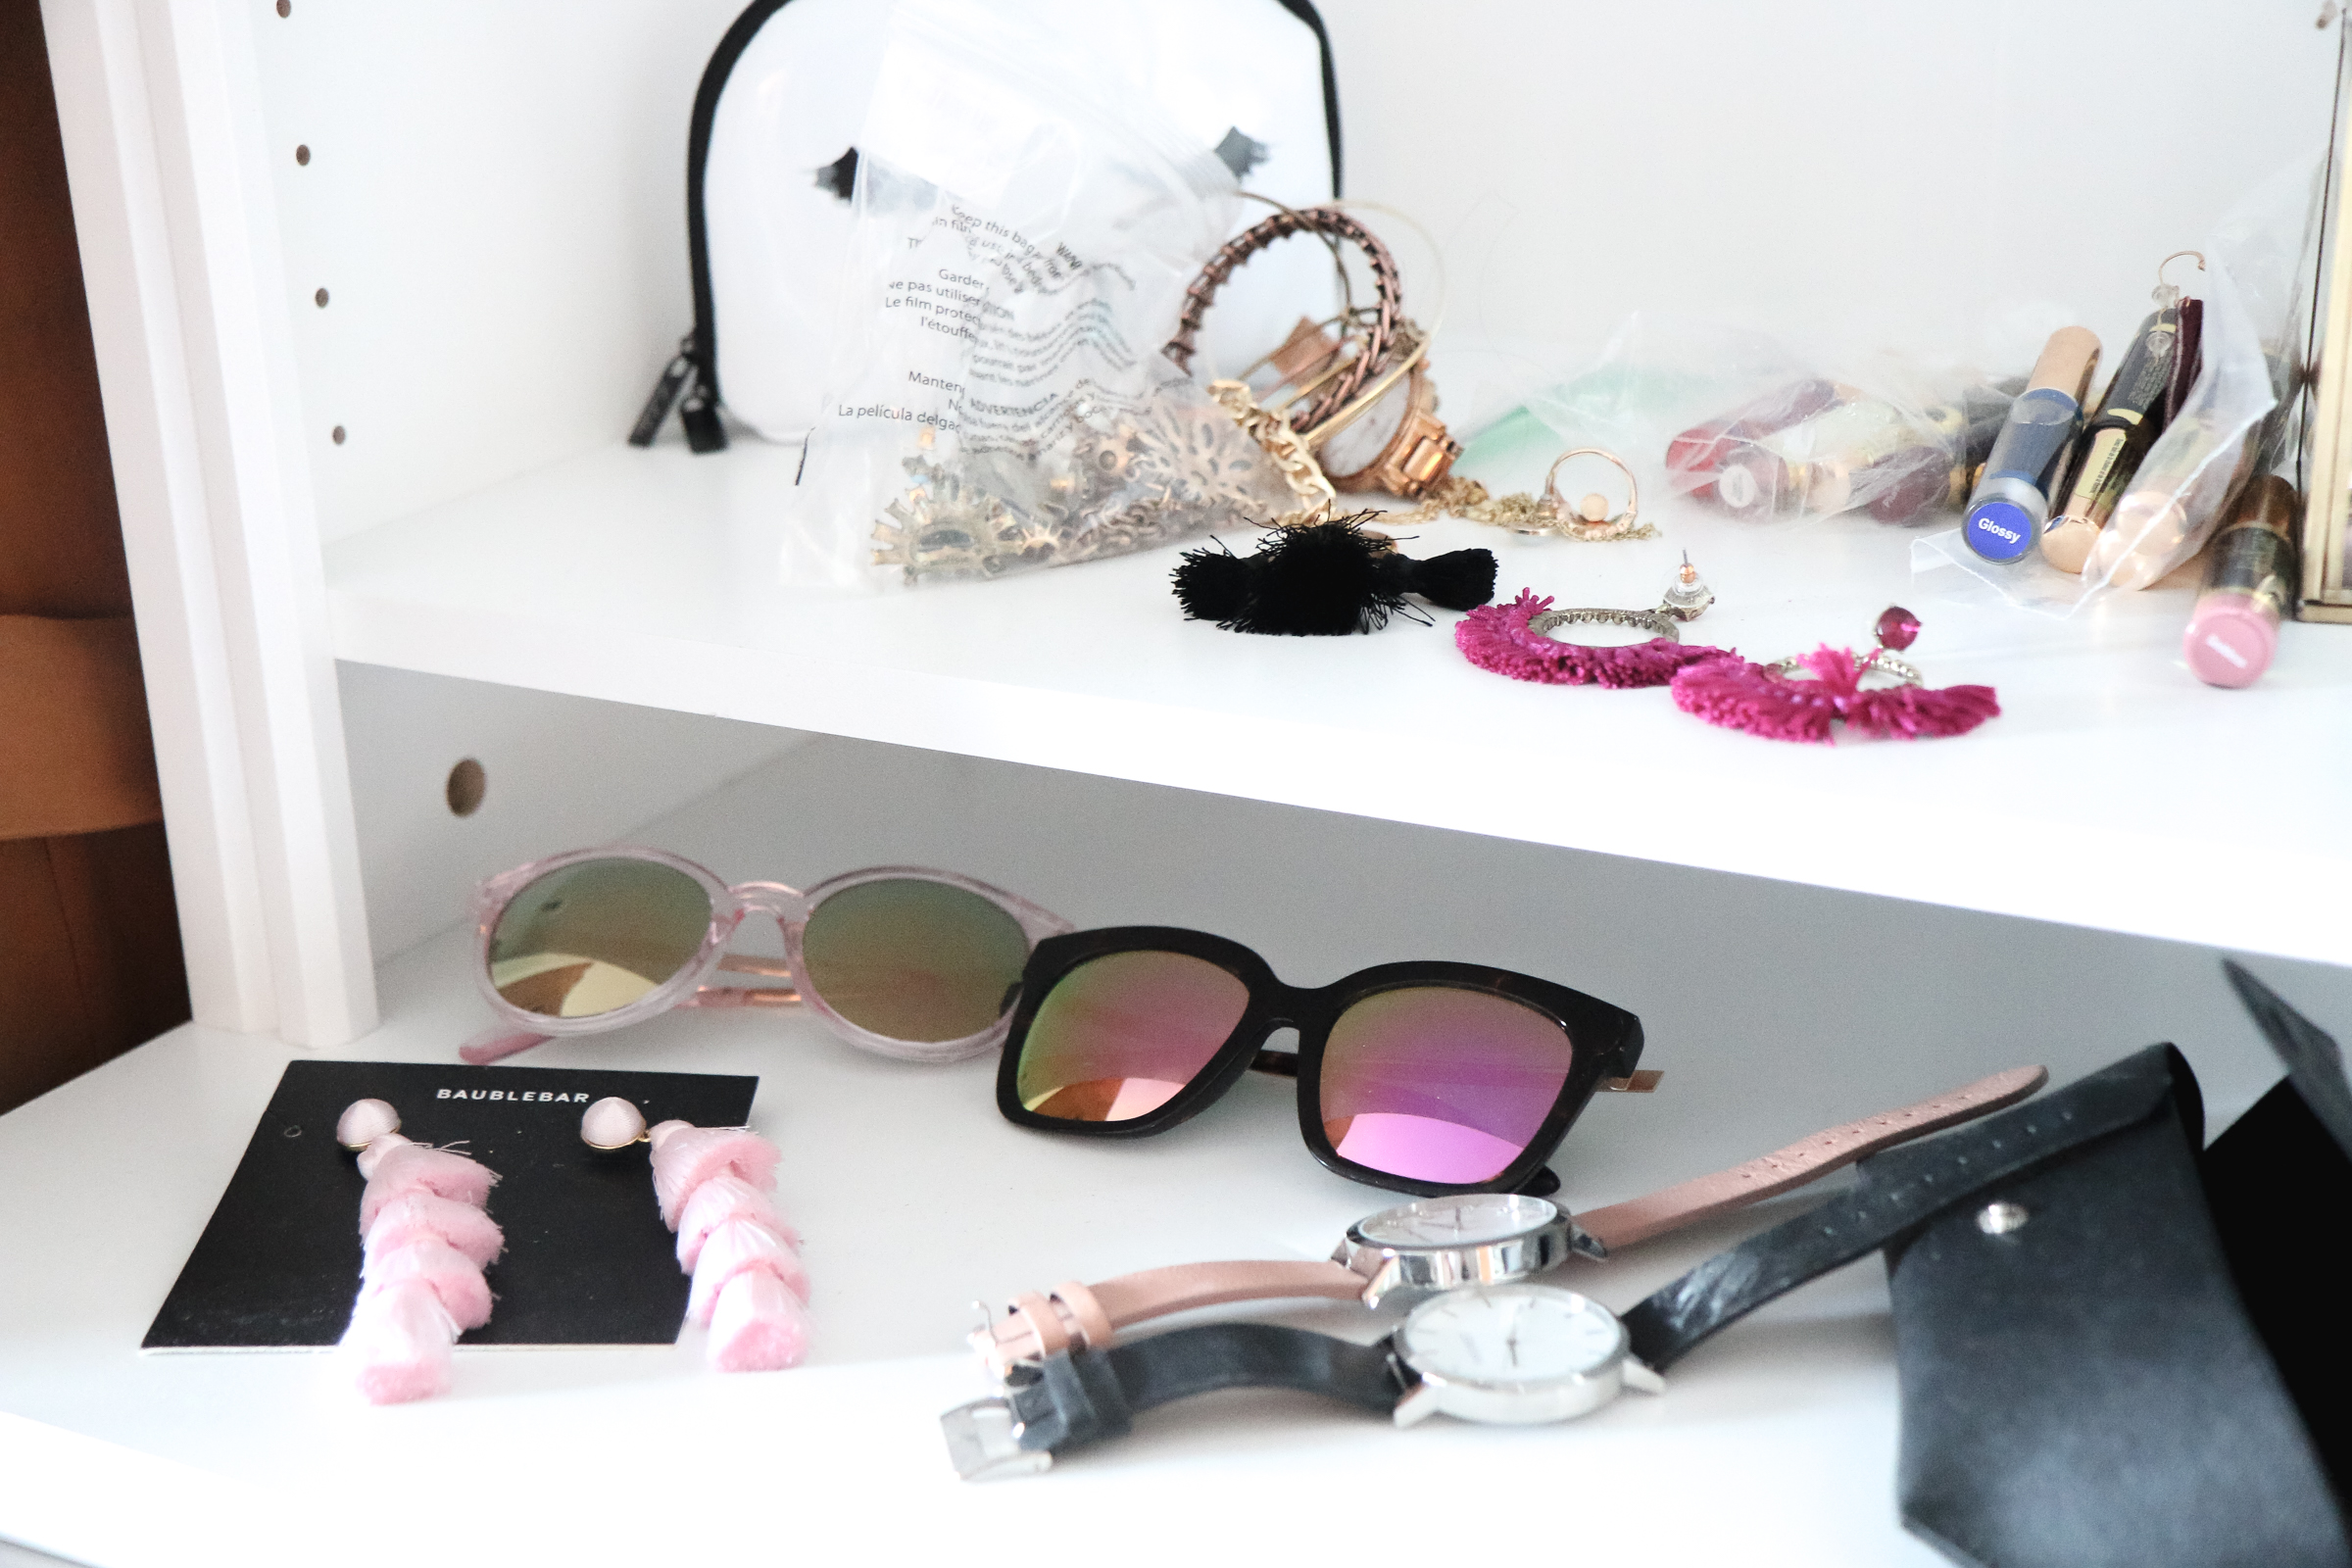 5 Tips From a Professional Organizer That Will Change Your Life by Utah lifestyle blogger Sandy A La Mode